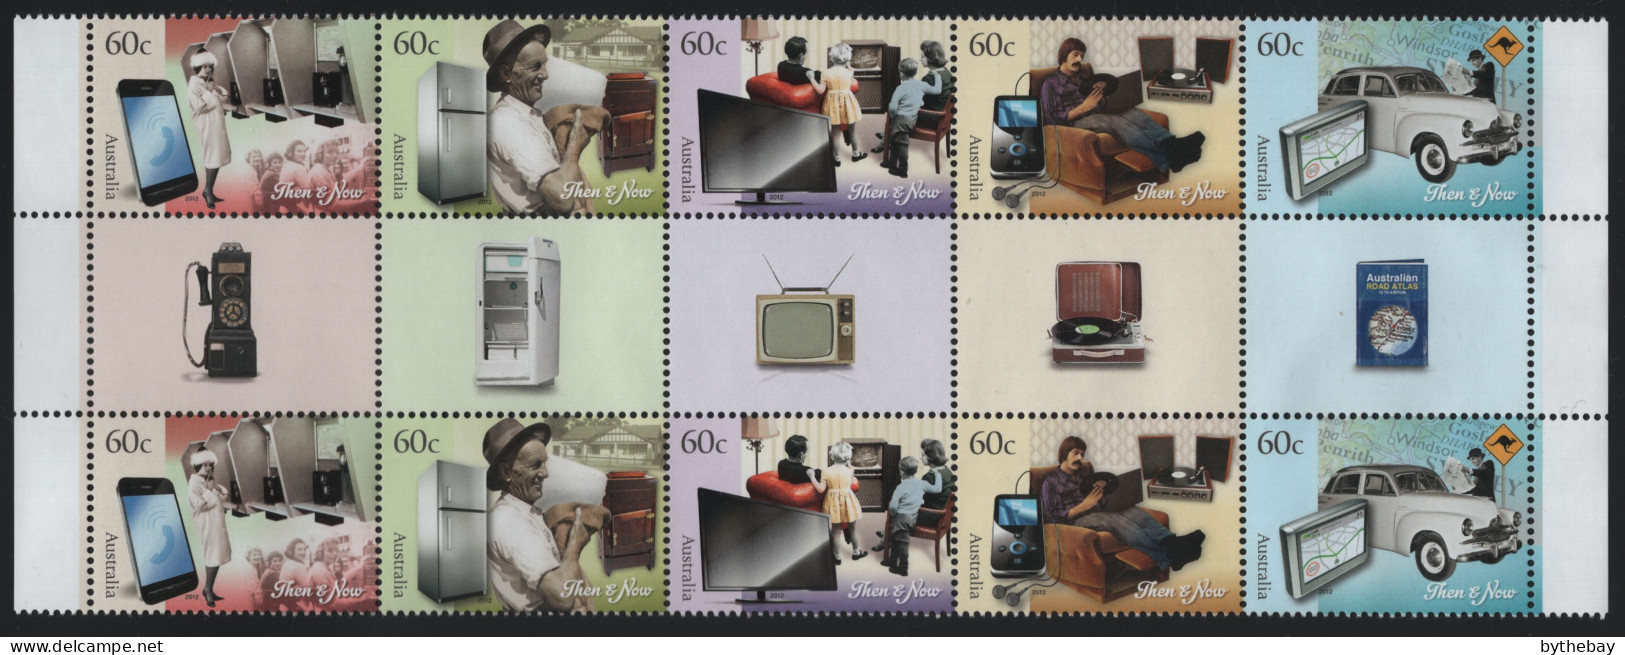 Australia 2012 MNH Sc 3646a 60c Telephone, Refrigerator, TV, Stereo, Maps Gutter - Mint Stamps